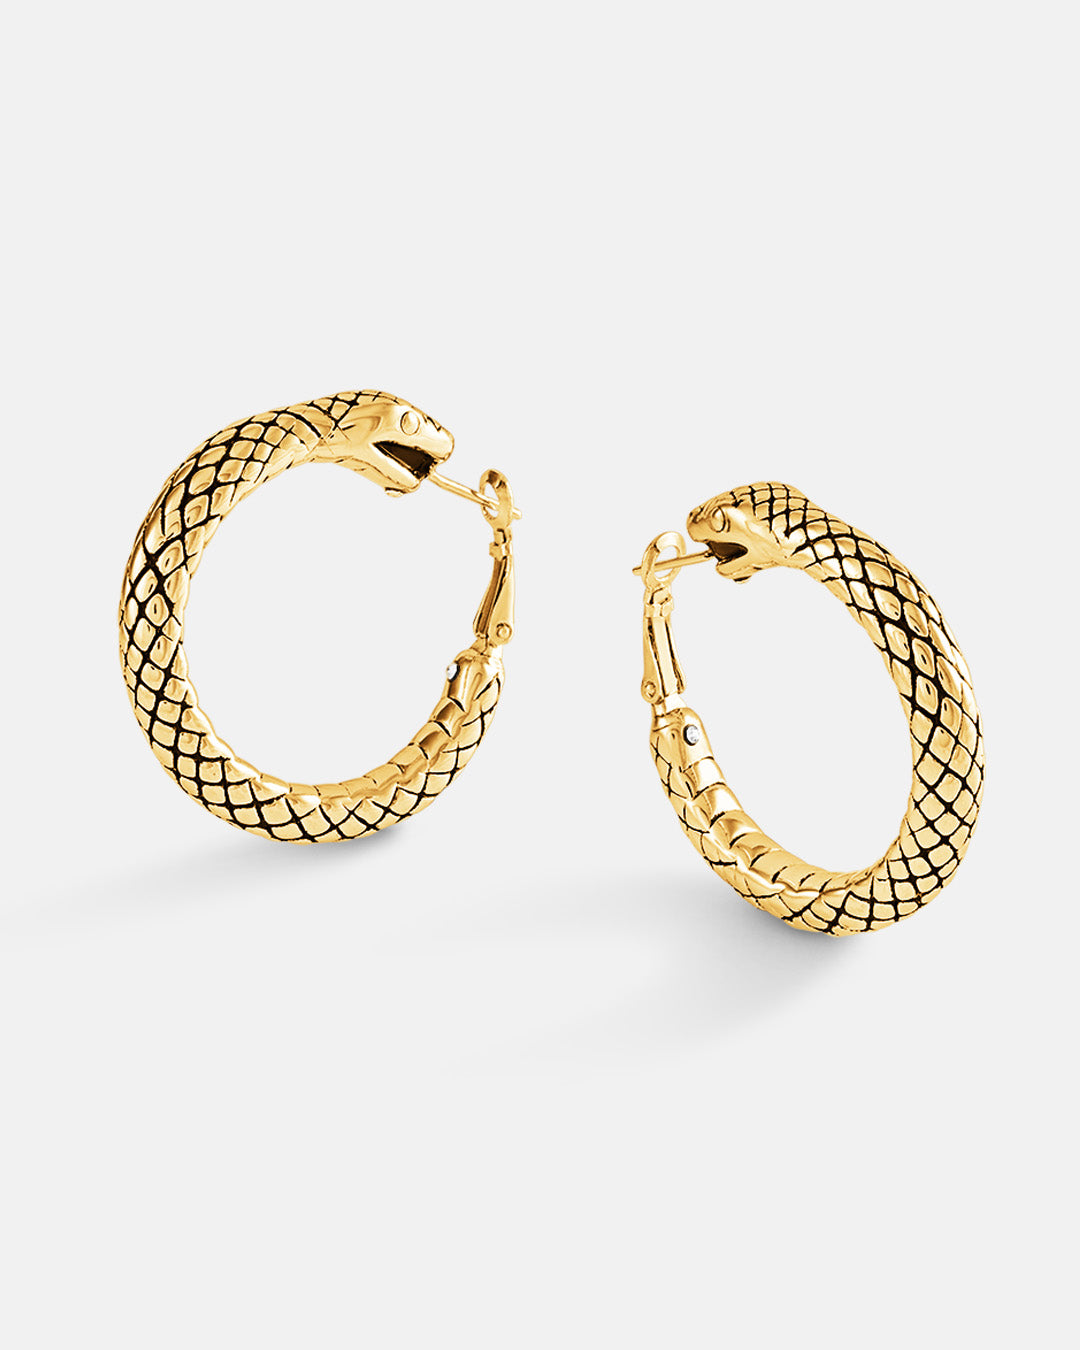 This is the product picture of a snake hoops earrings plated in gold in sterling silver material